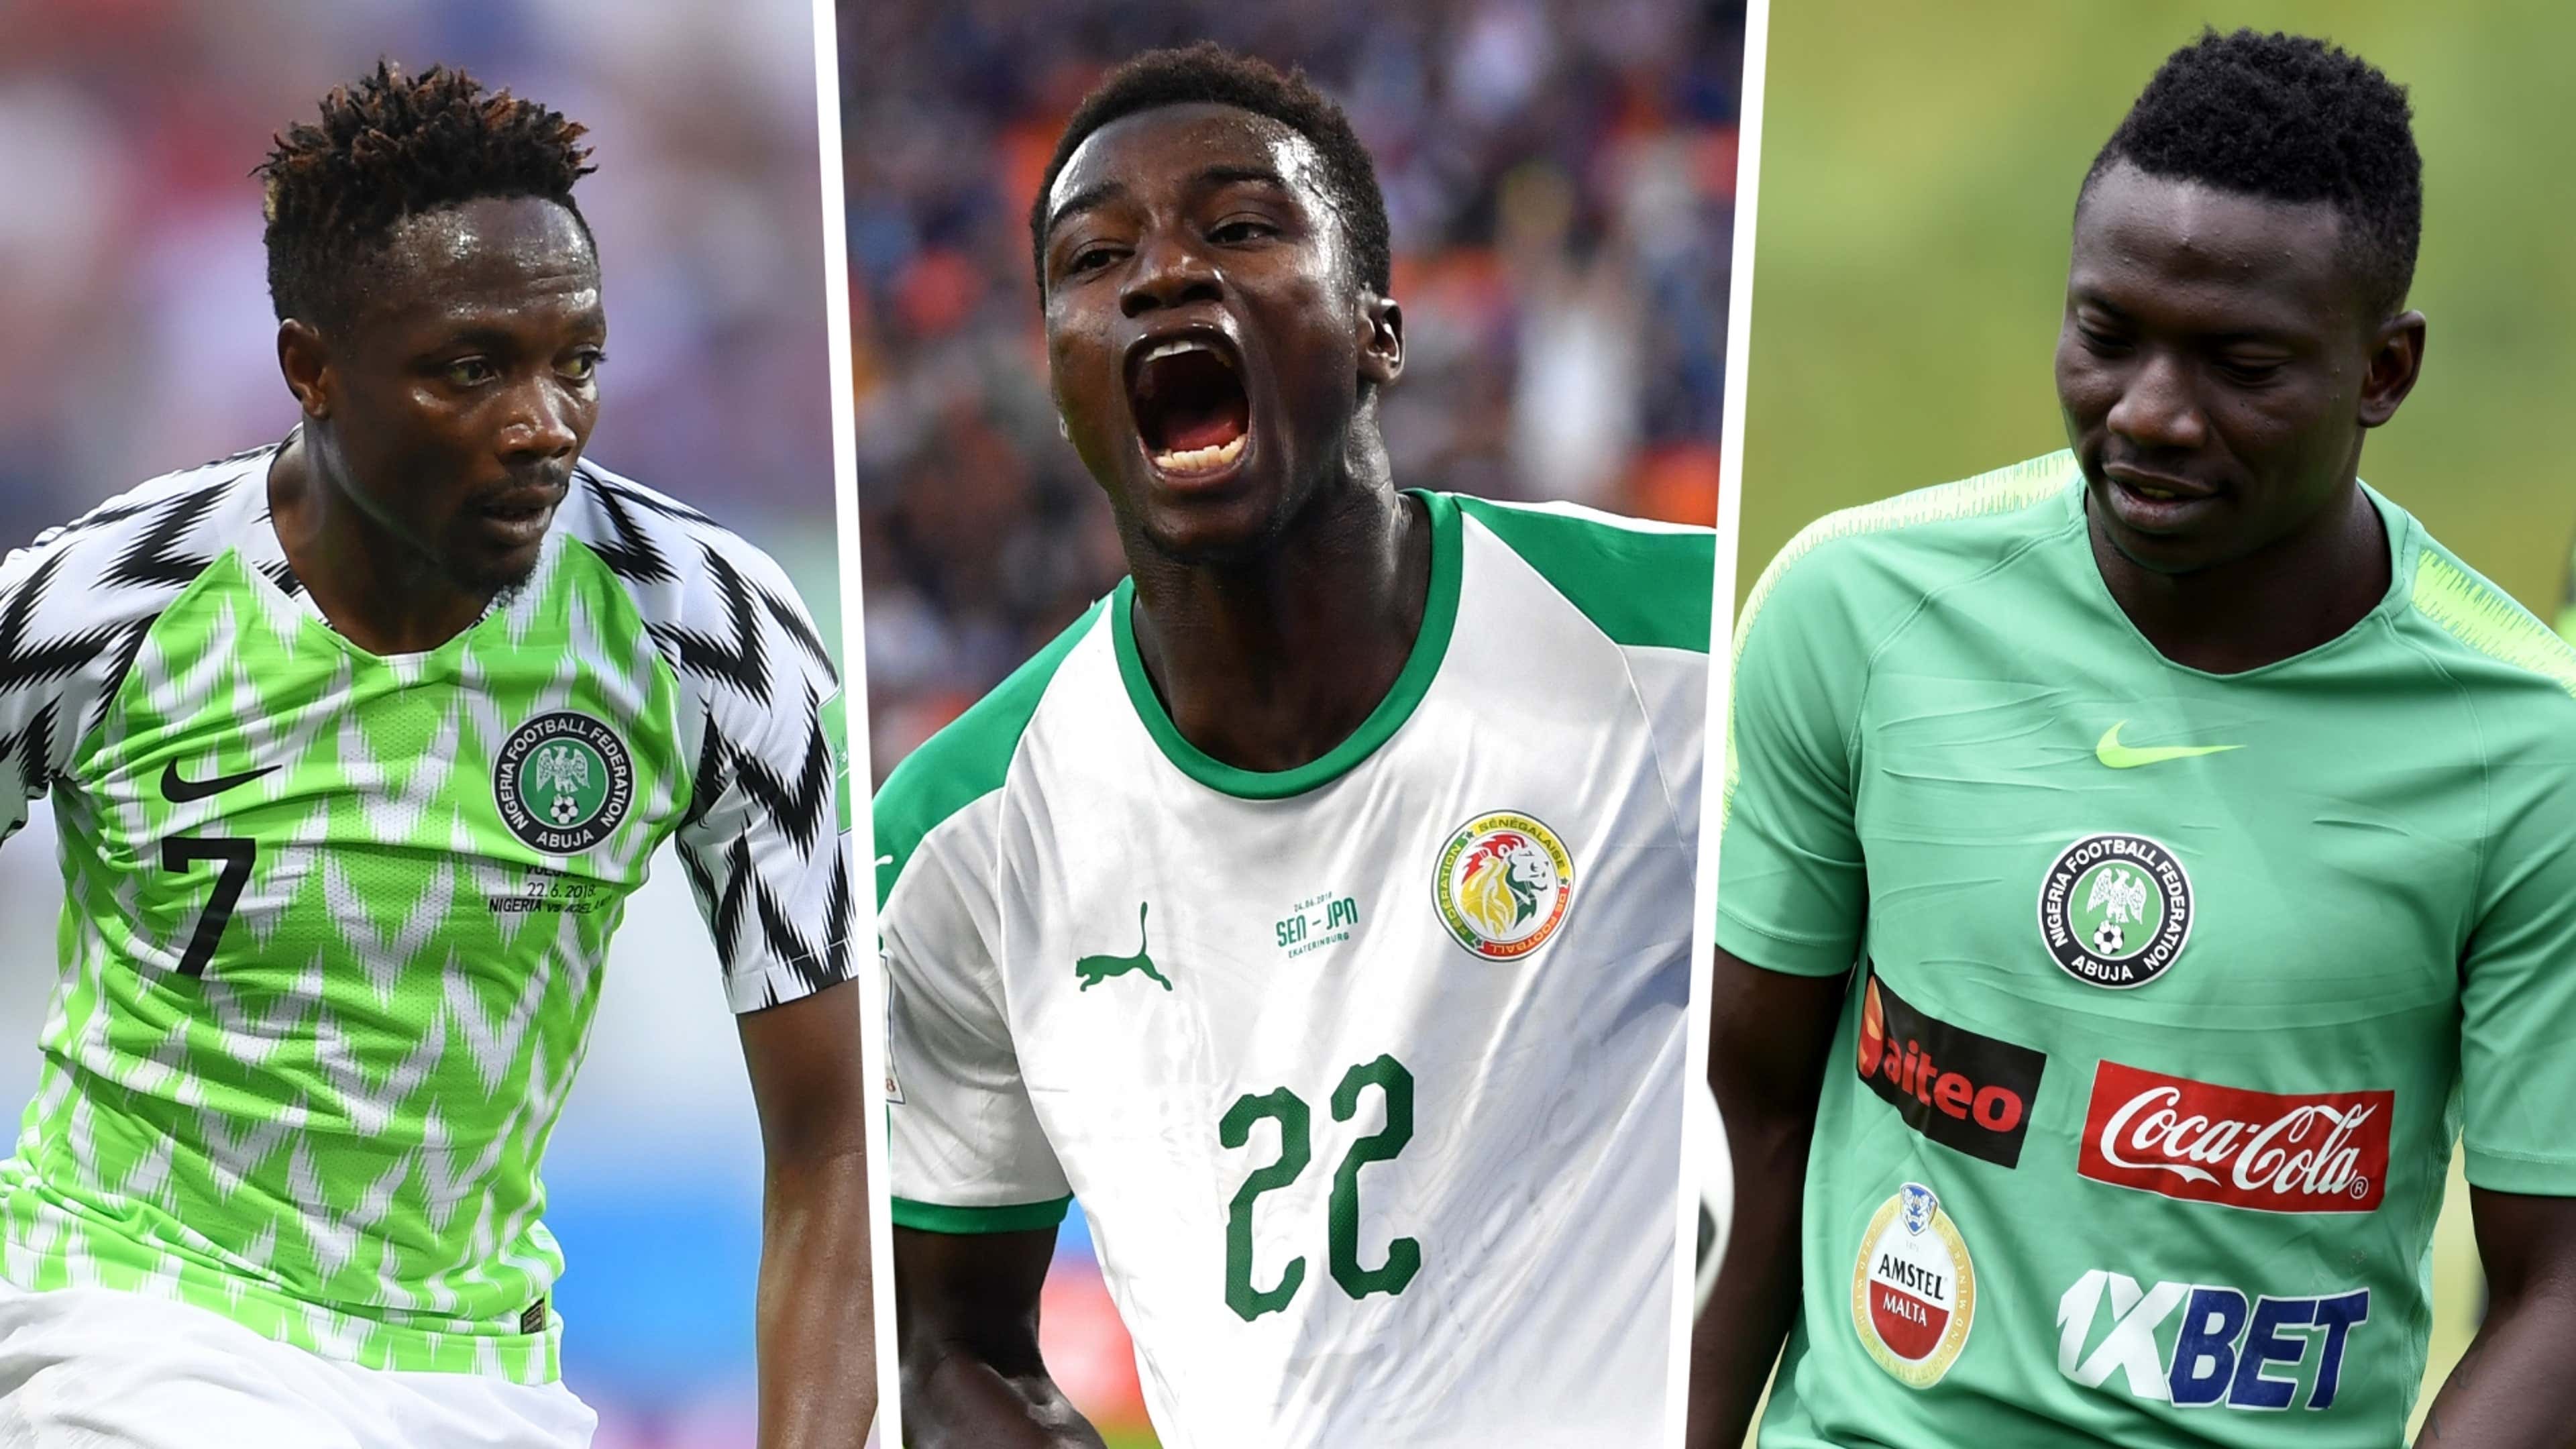 Africa’s stars of the 2018 World Cup: Where are they now? | Goal.com